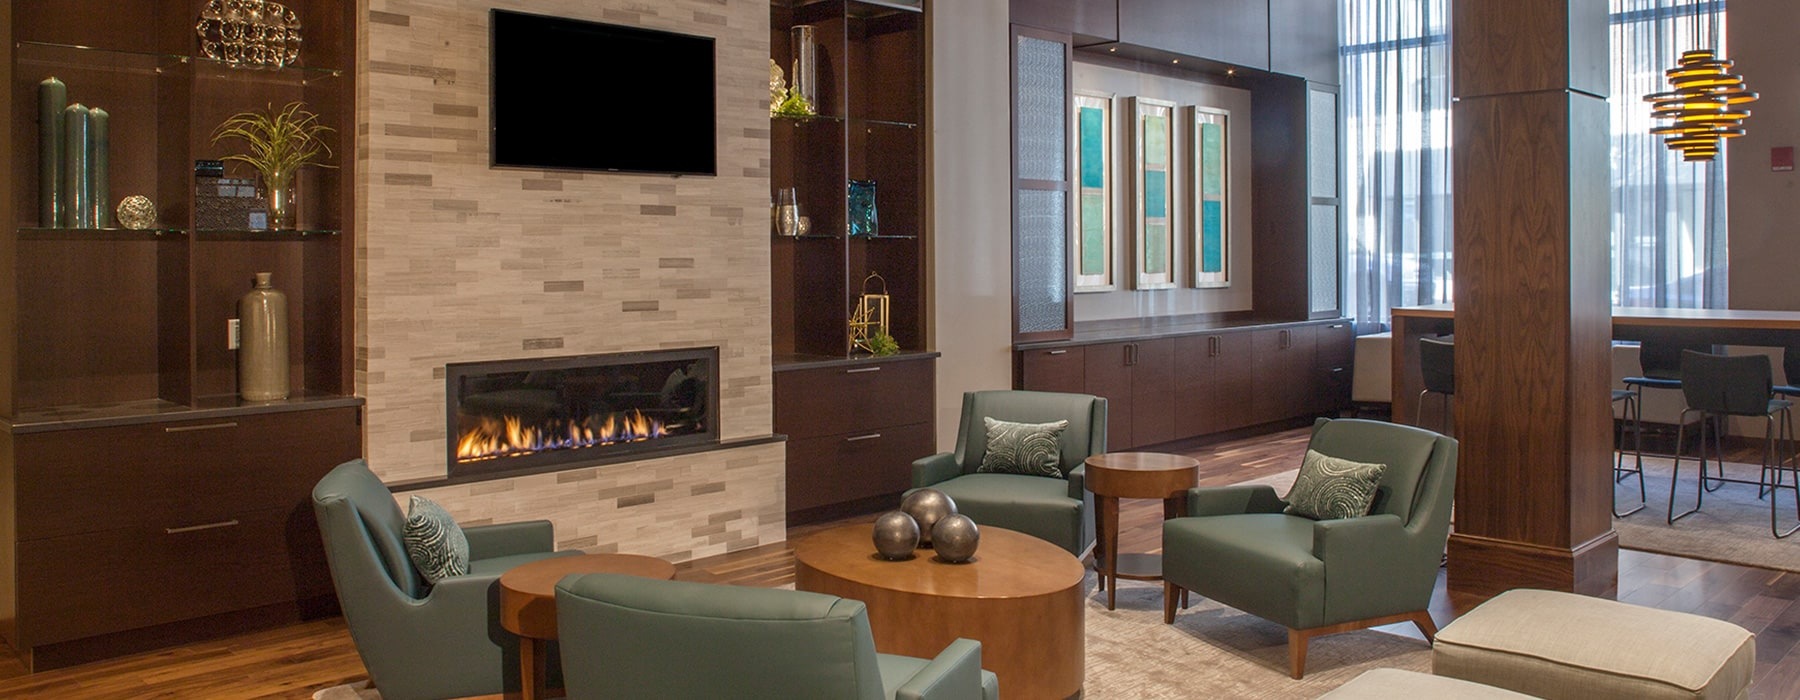 clubroom with modern seating, high-ceilings, a fireplace, wooden accents and modern decor